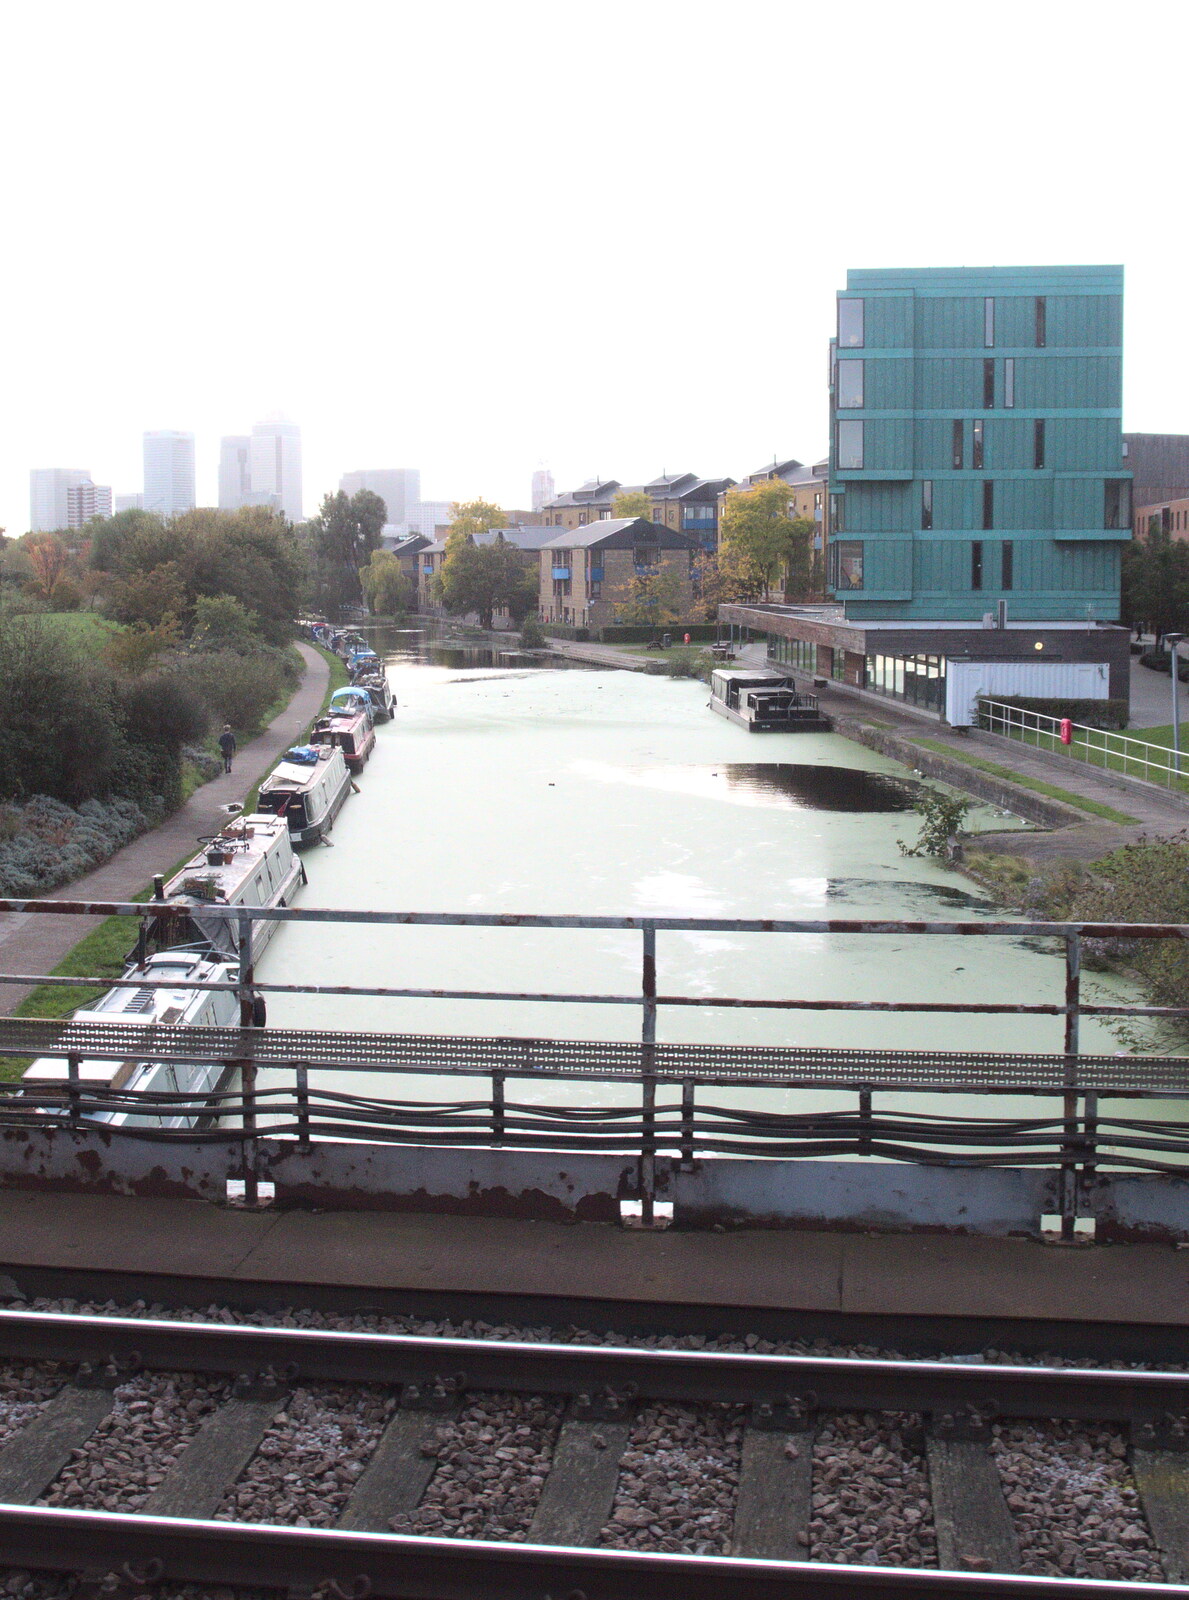 The Regents Canal is all green algae again from Public Service Broadcasting at the UEA and some Dereliction, Norwich and Brantham - 14th October 2017